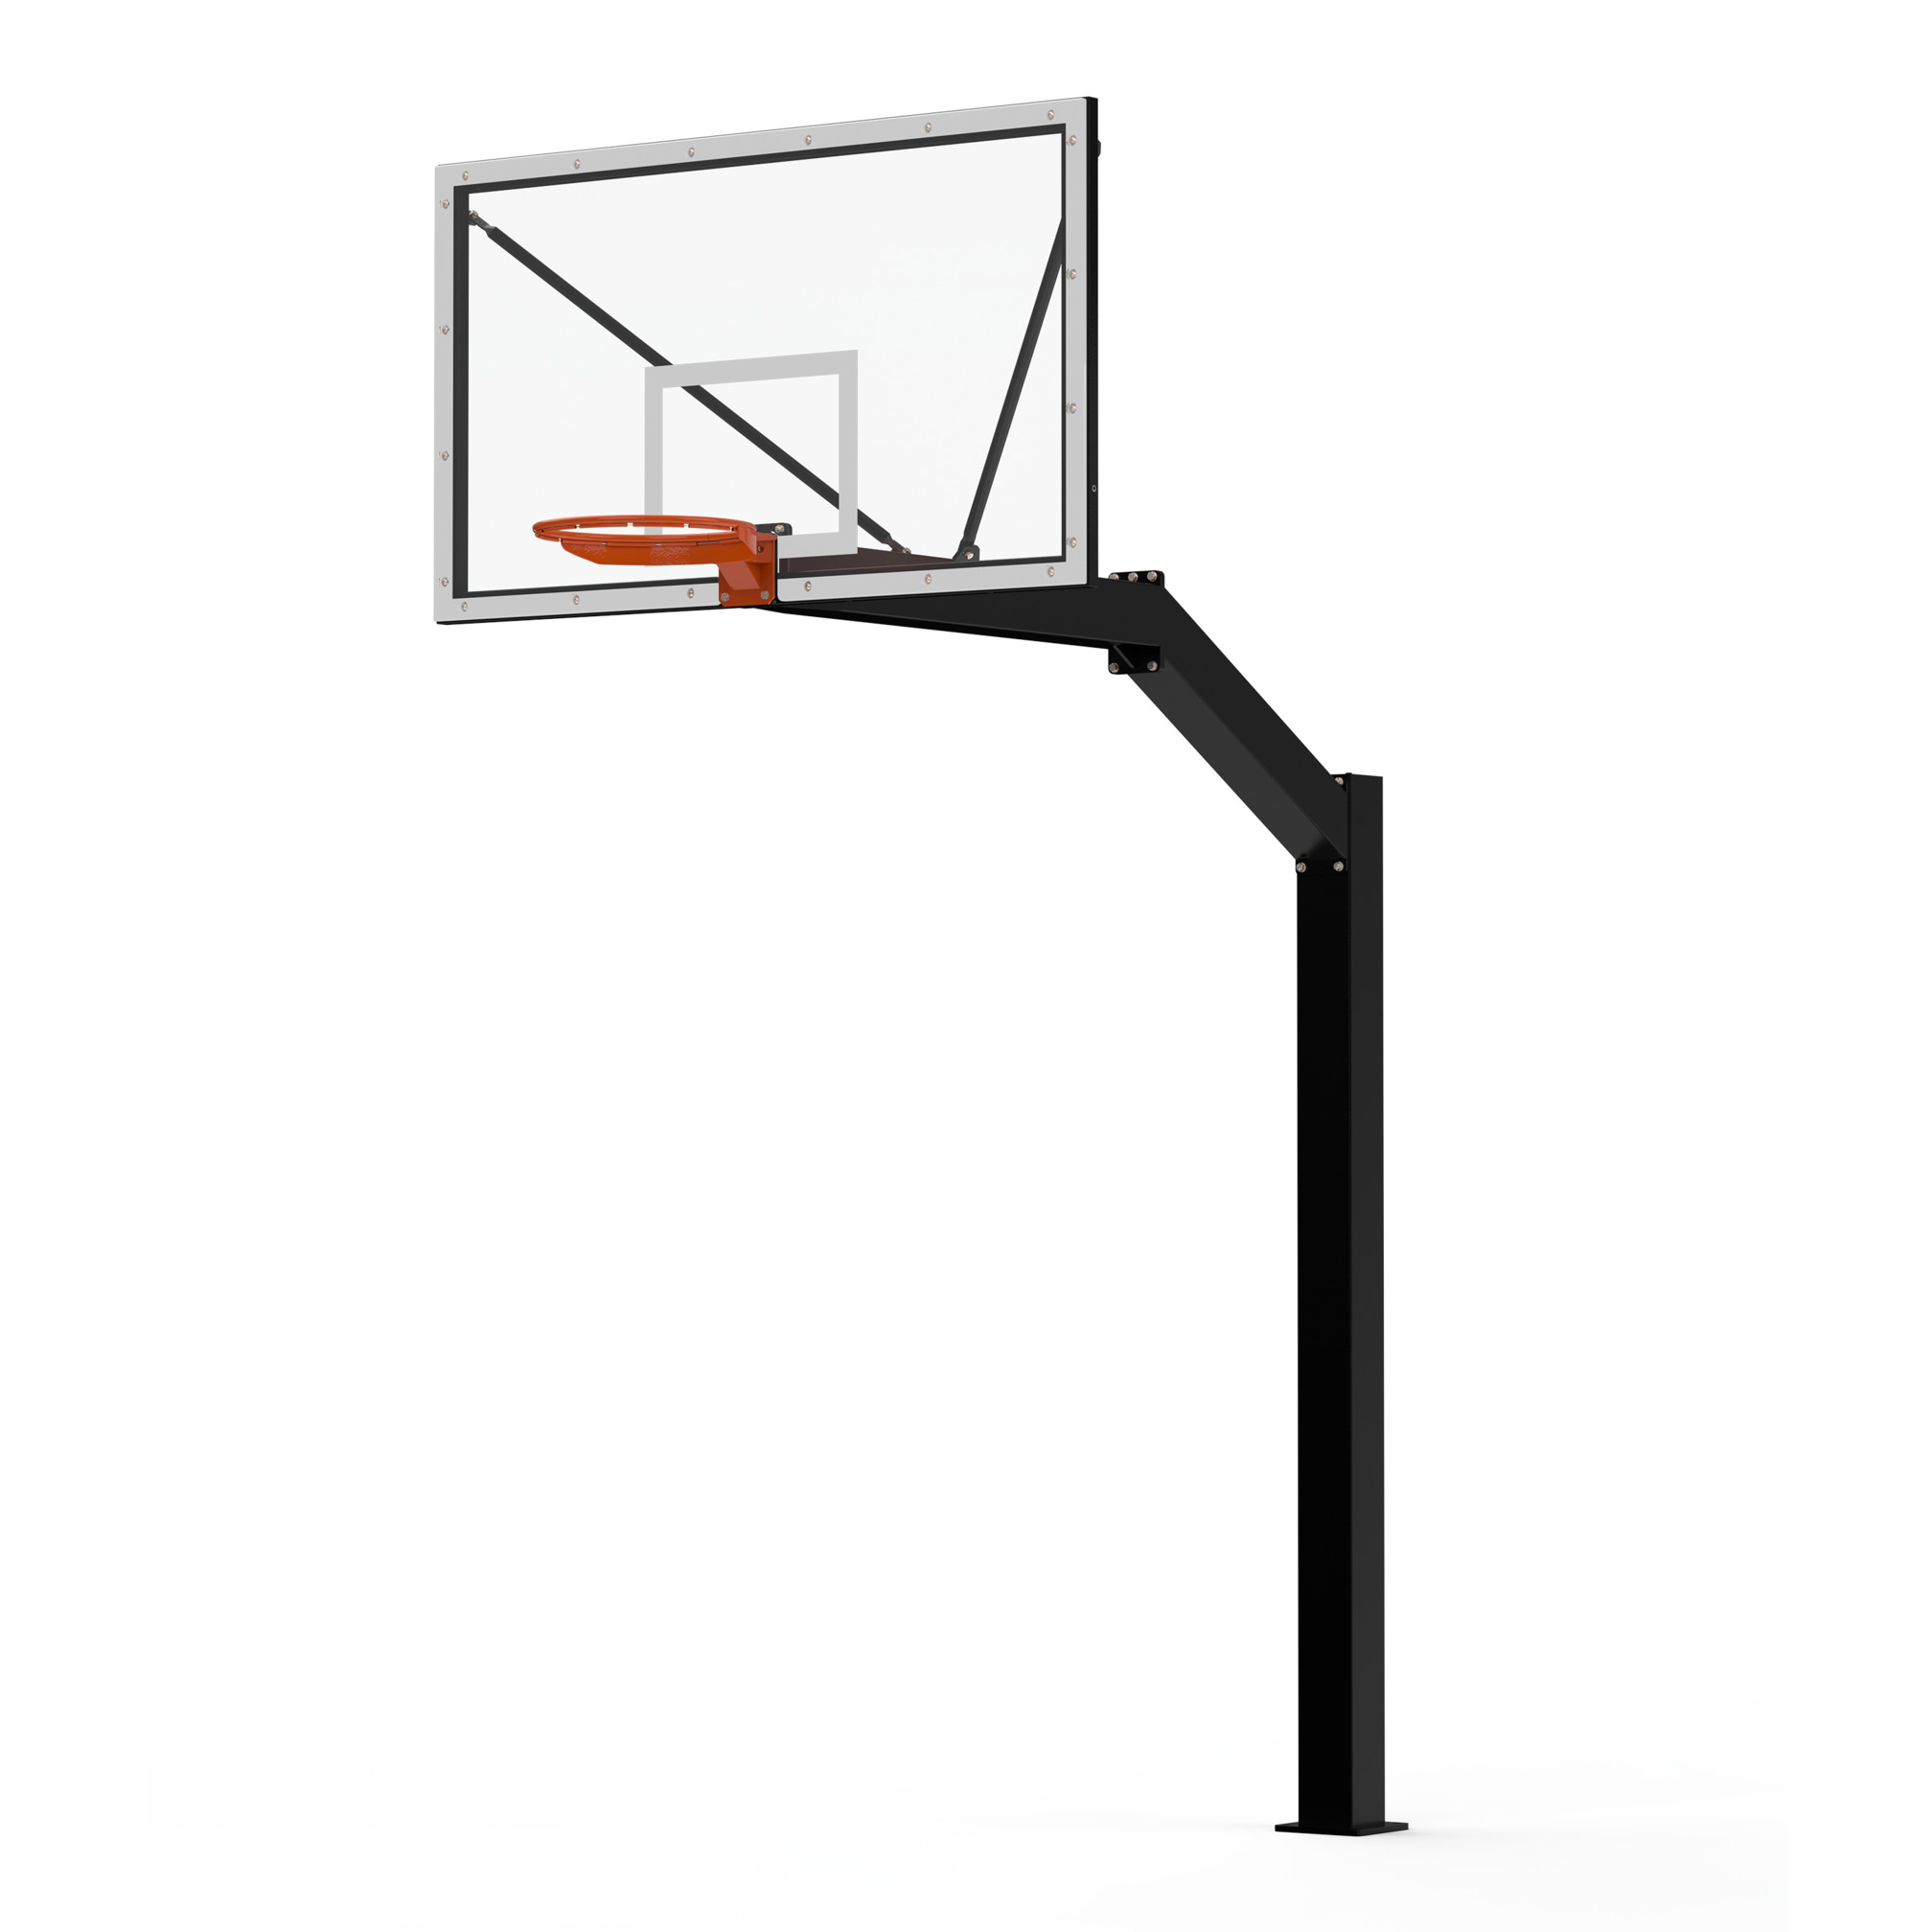 Urban Court Slammer 225 cm projection incl. Basketball ring Competition